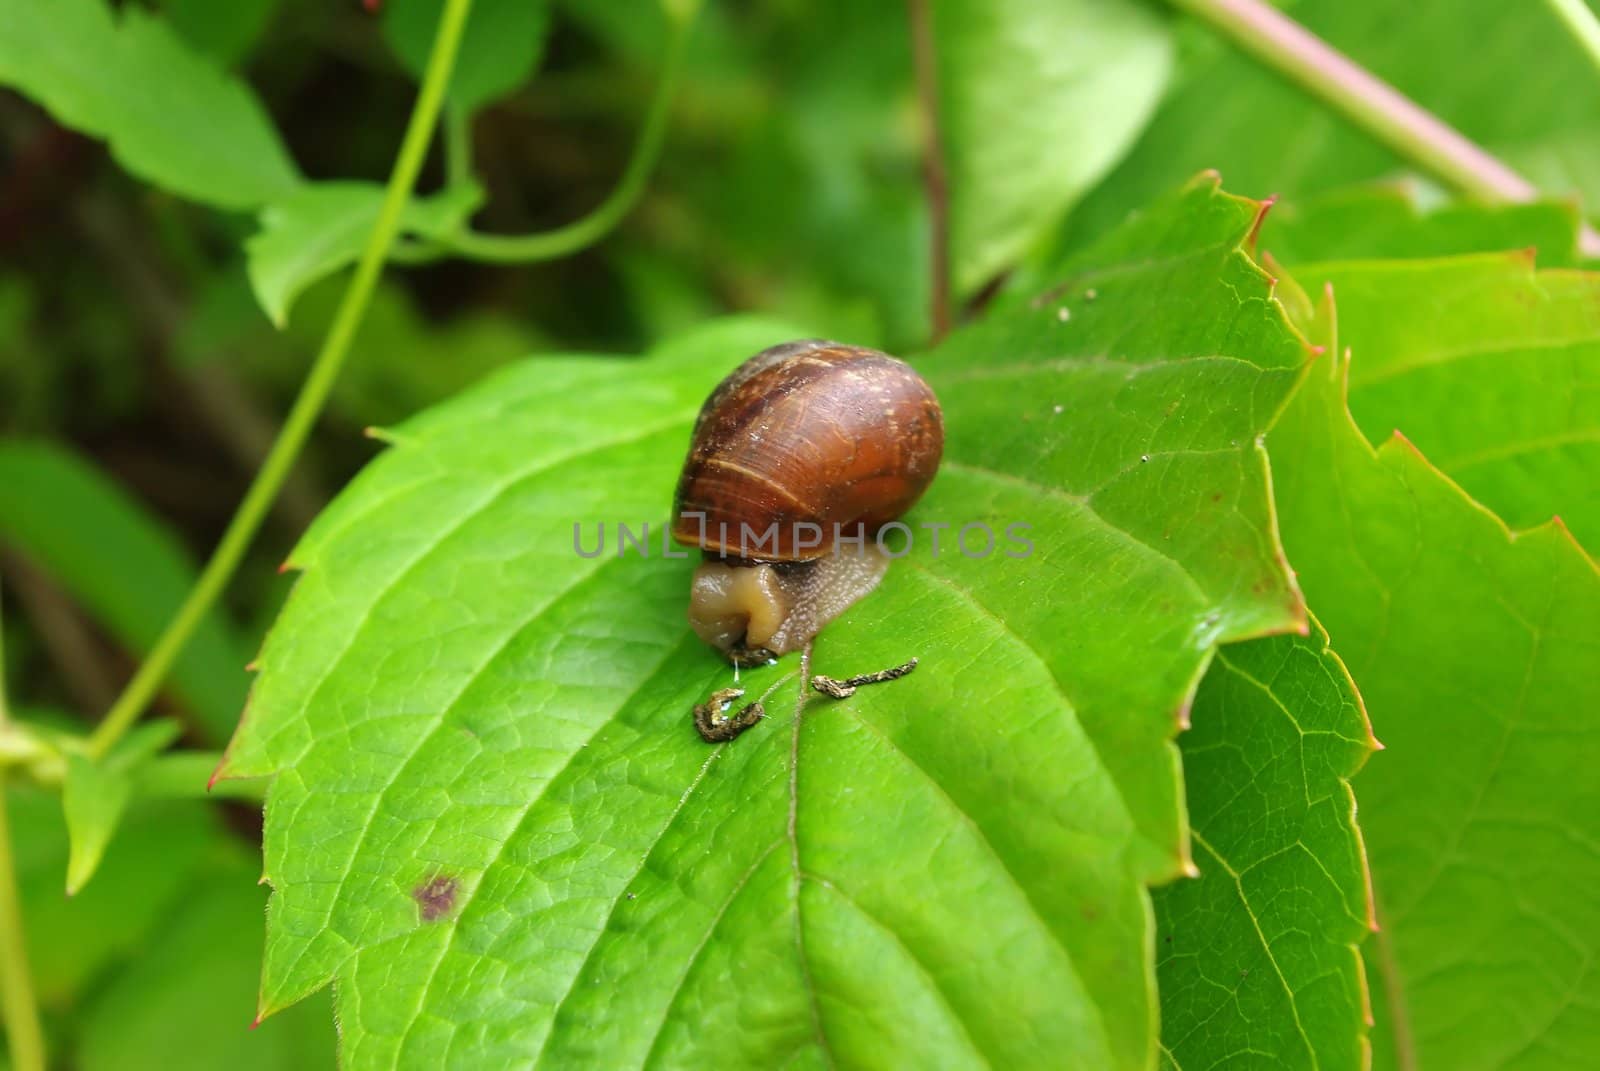 Snail on the green leaf by Vitamin